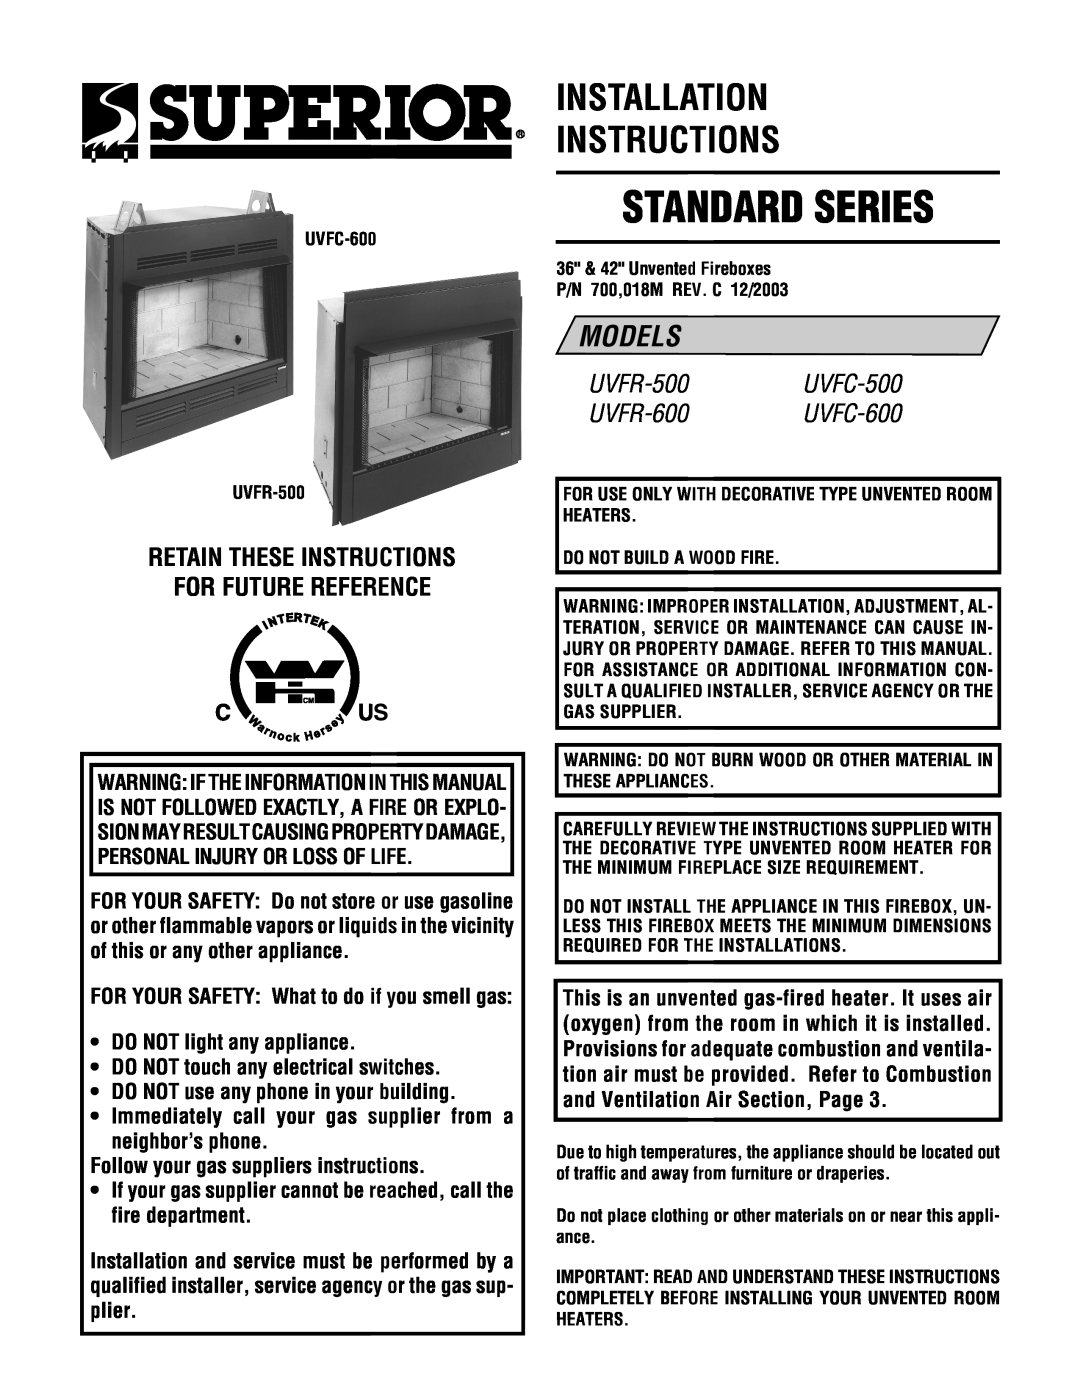 Superior UVFC-600 installation instructions DO NOT light any appliance, DO NOT touch any electrical switches, UVFR-500 